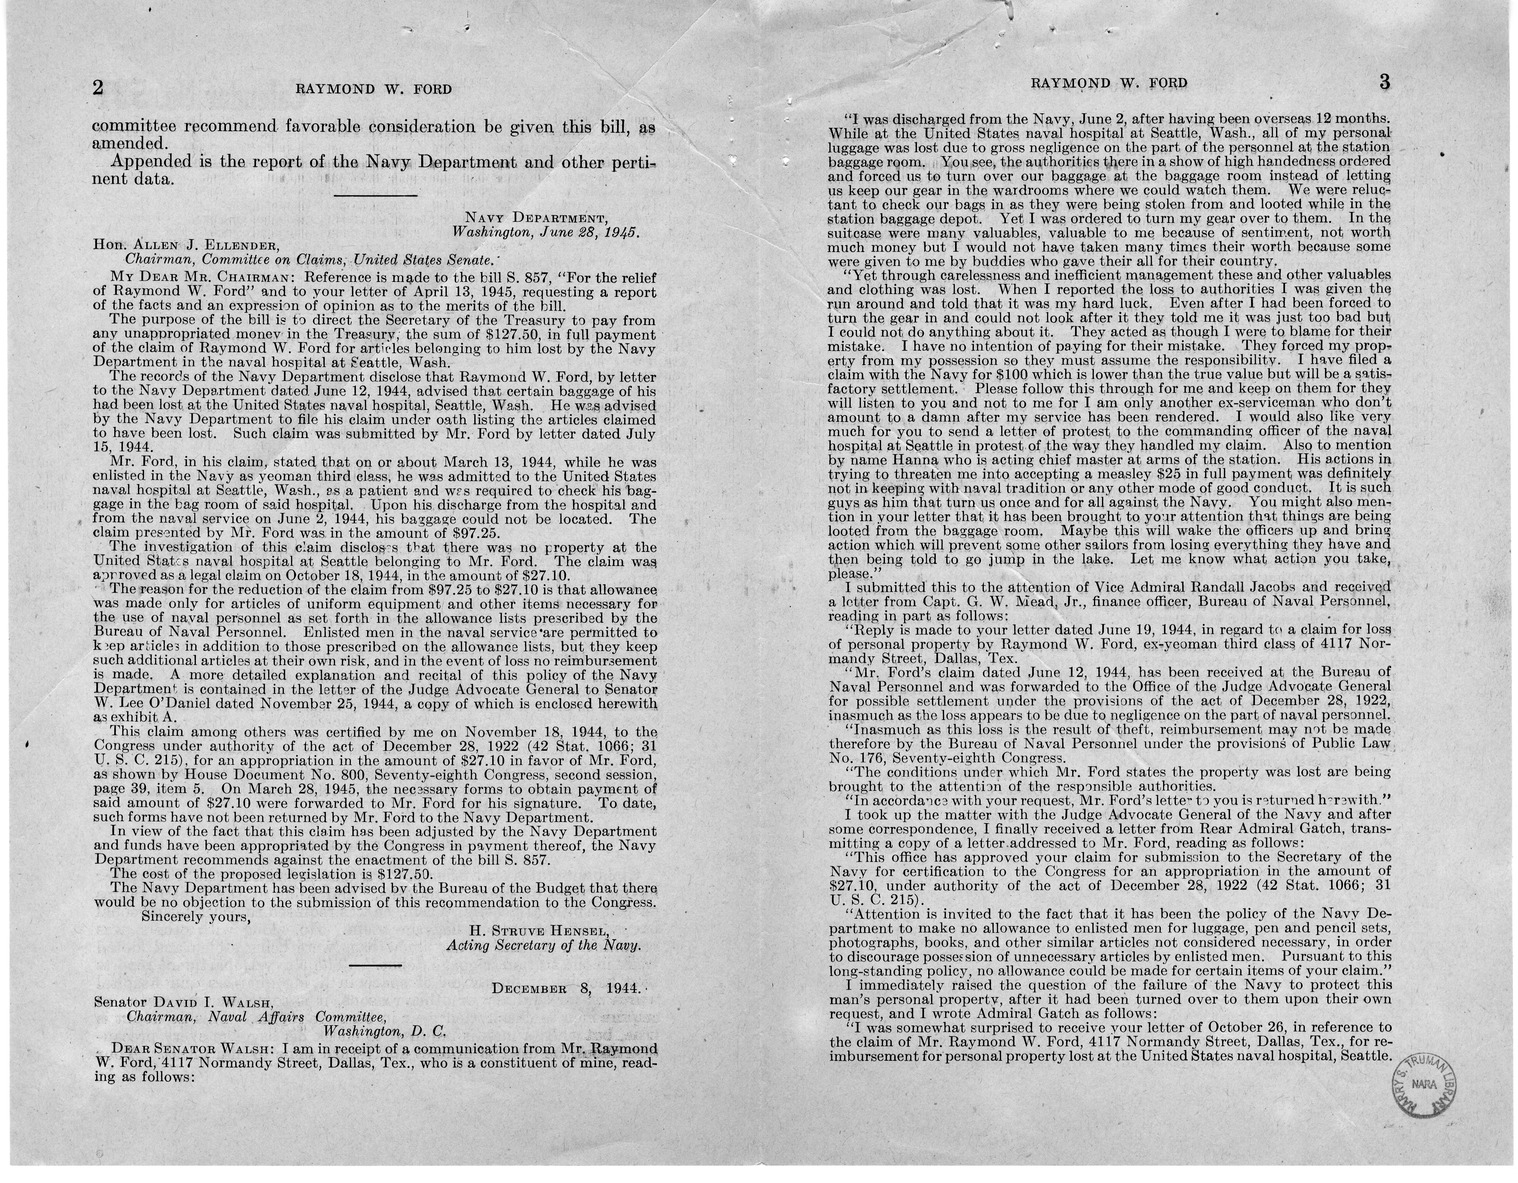 Memorandum from Paul H. Appleby to M. C. Latta, H.R. 857, For the Relief of Raymond W. Ford, with Attachments